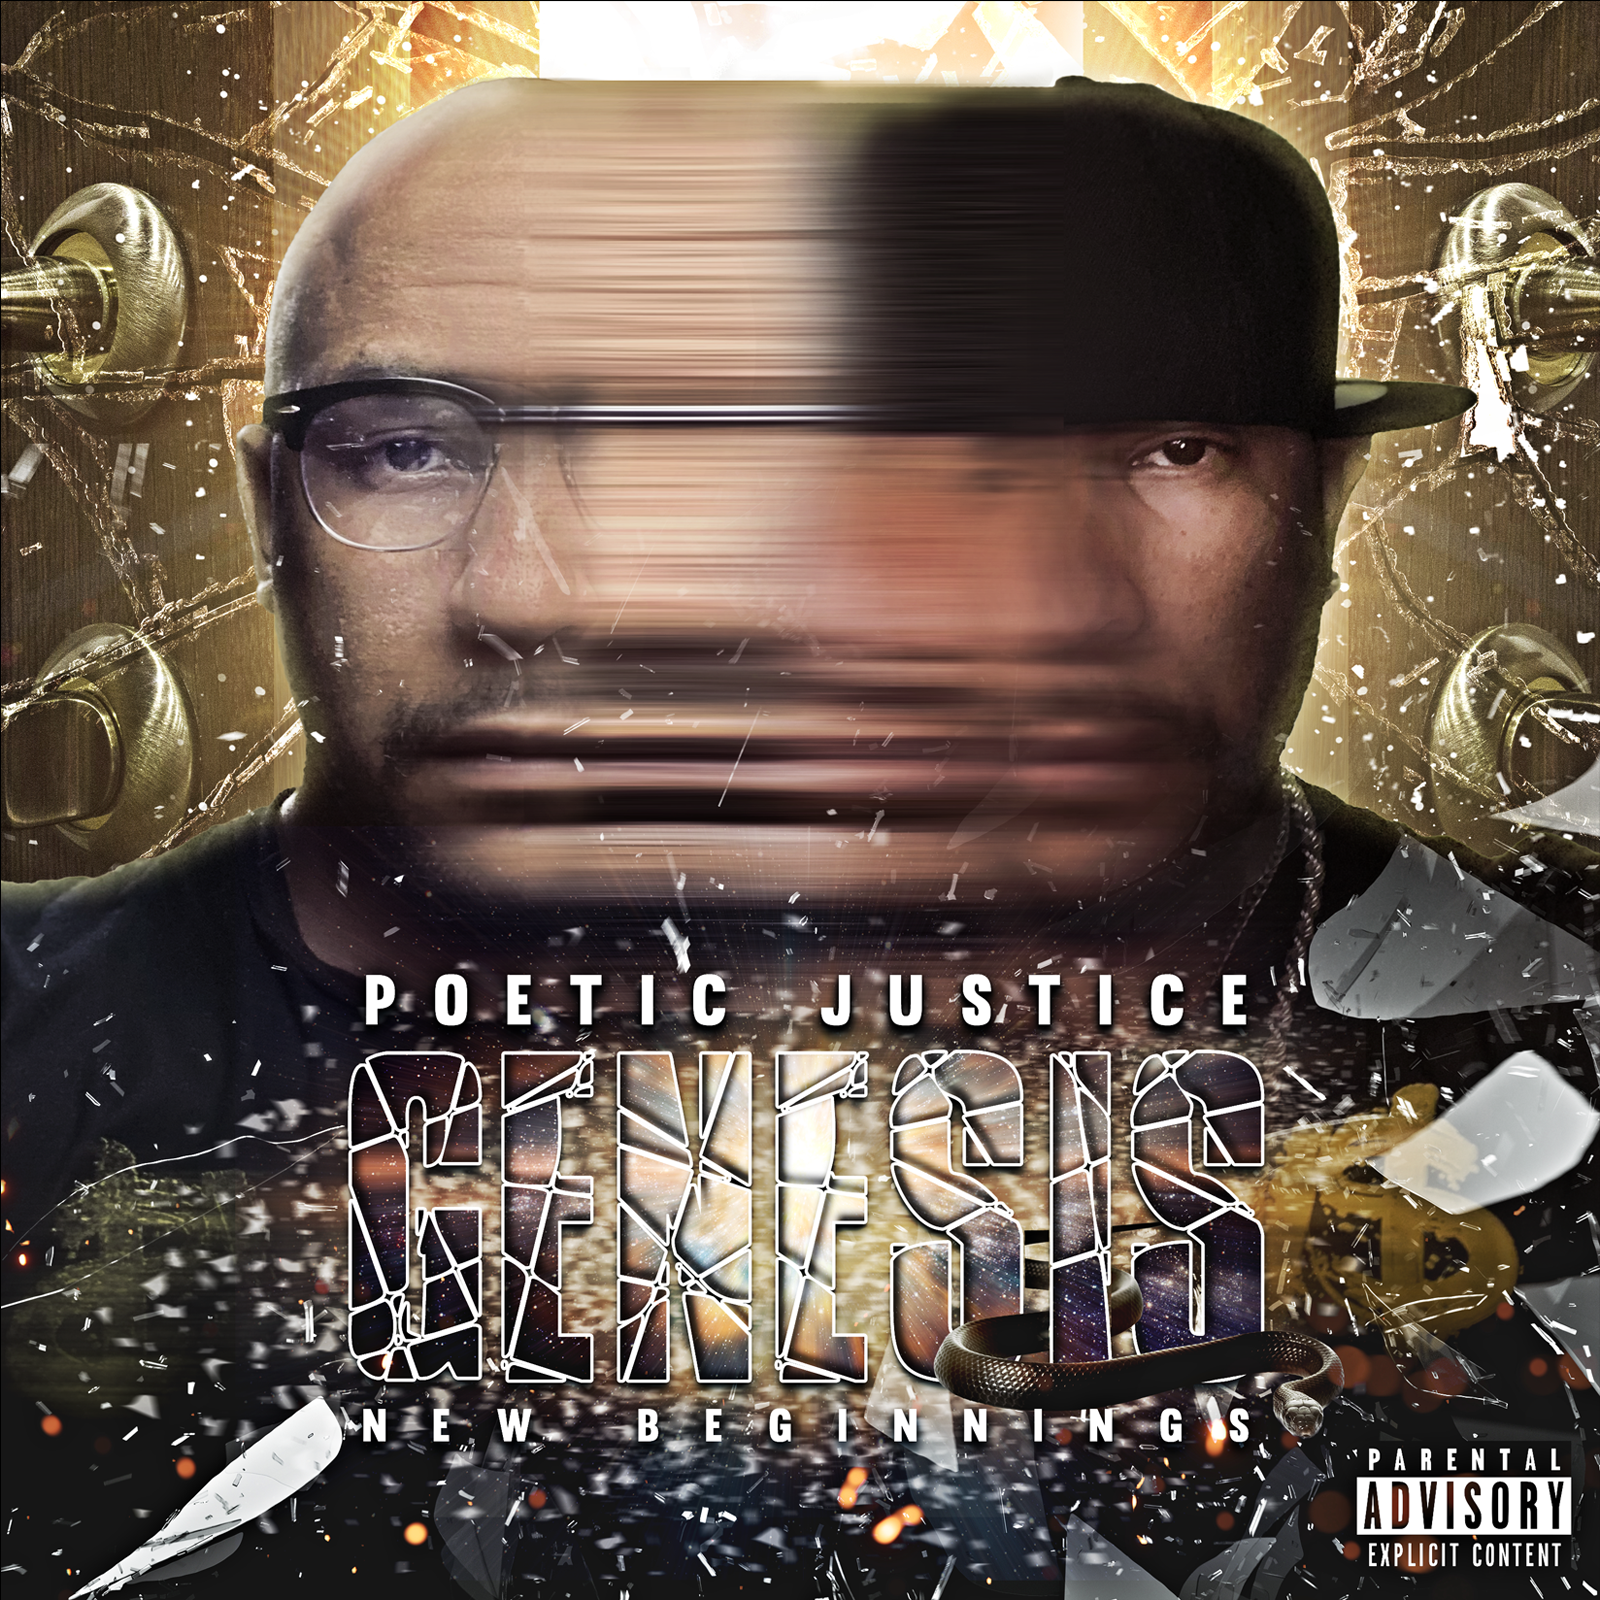 Art for JustUs by Poetic Justice